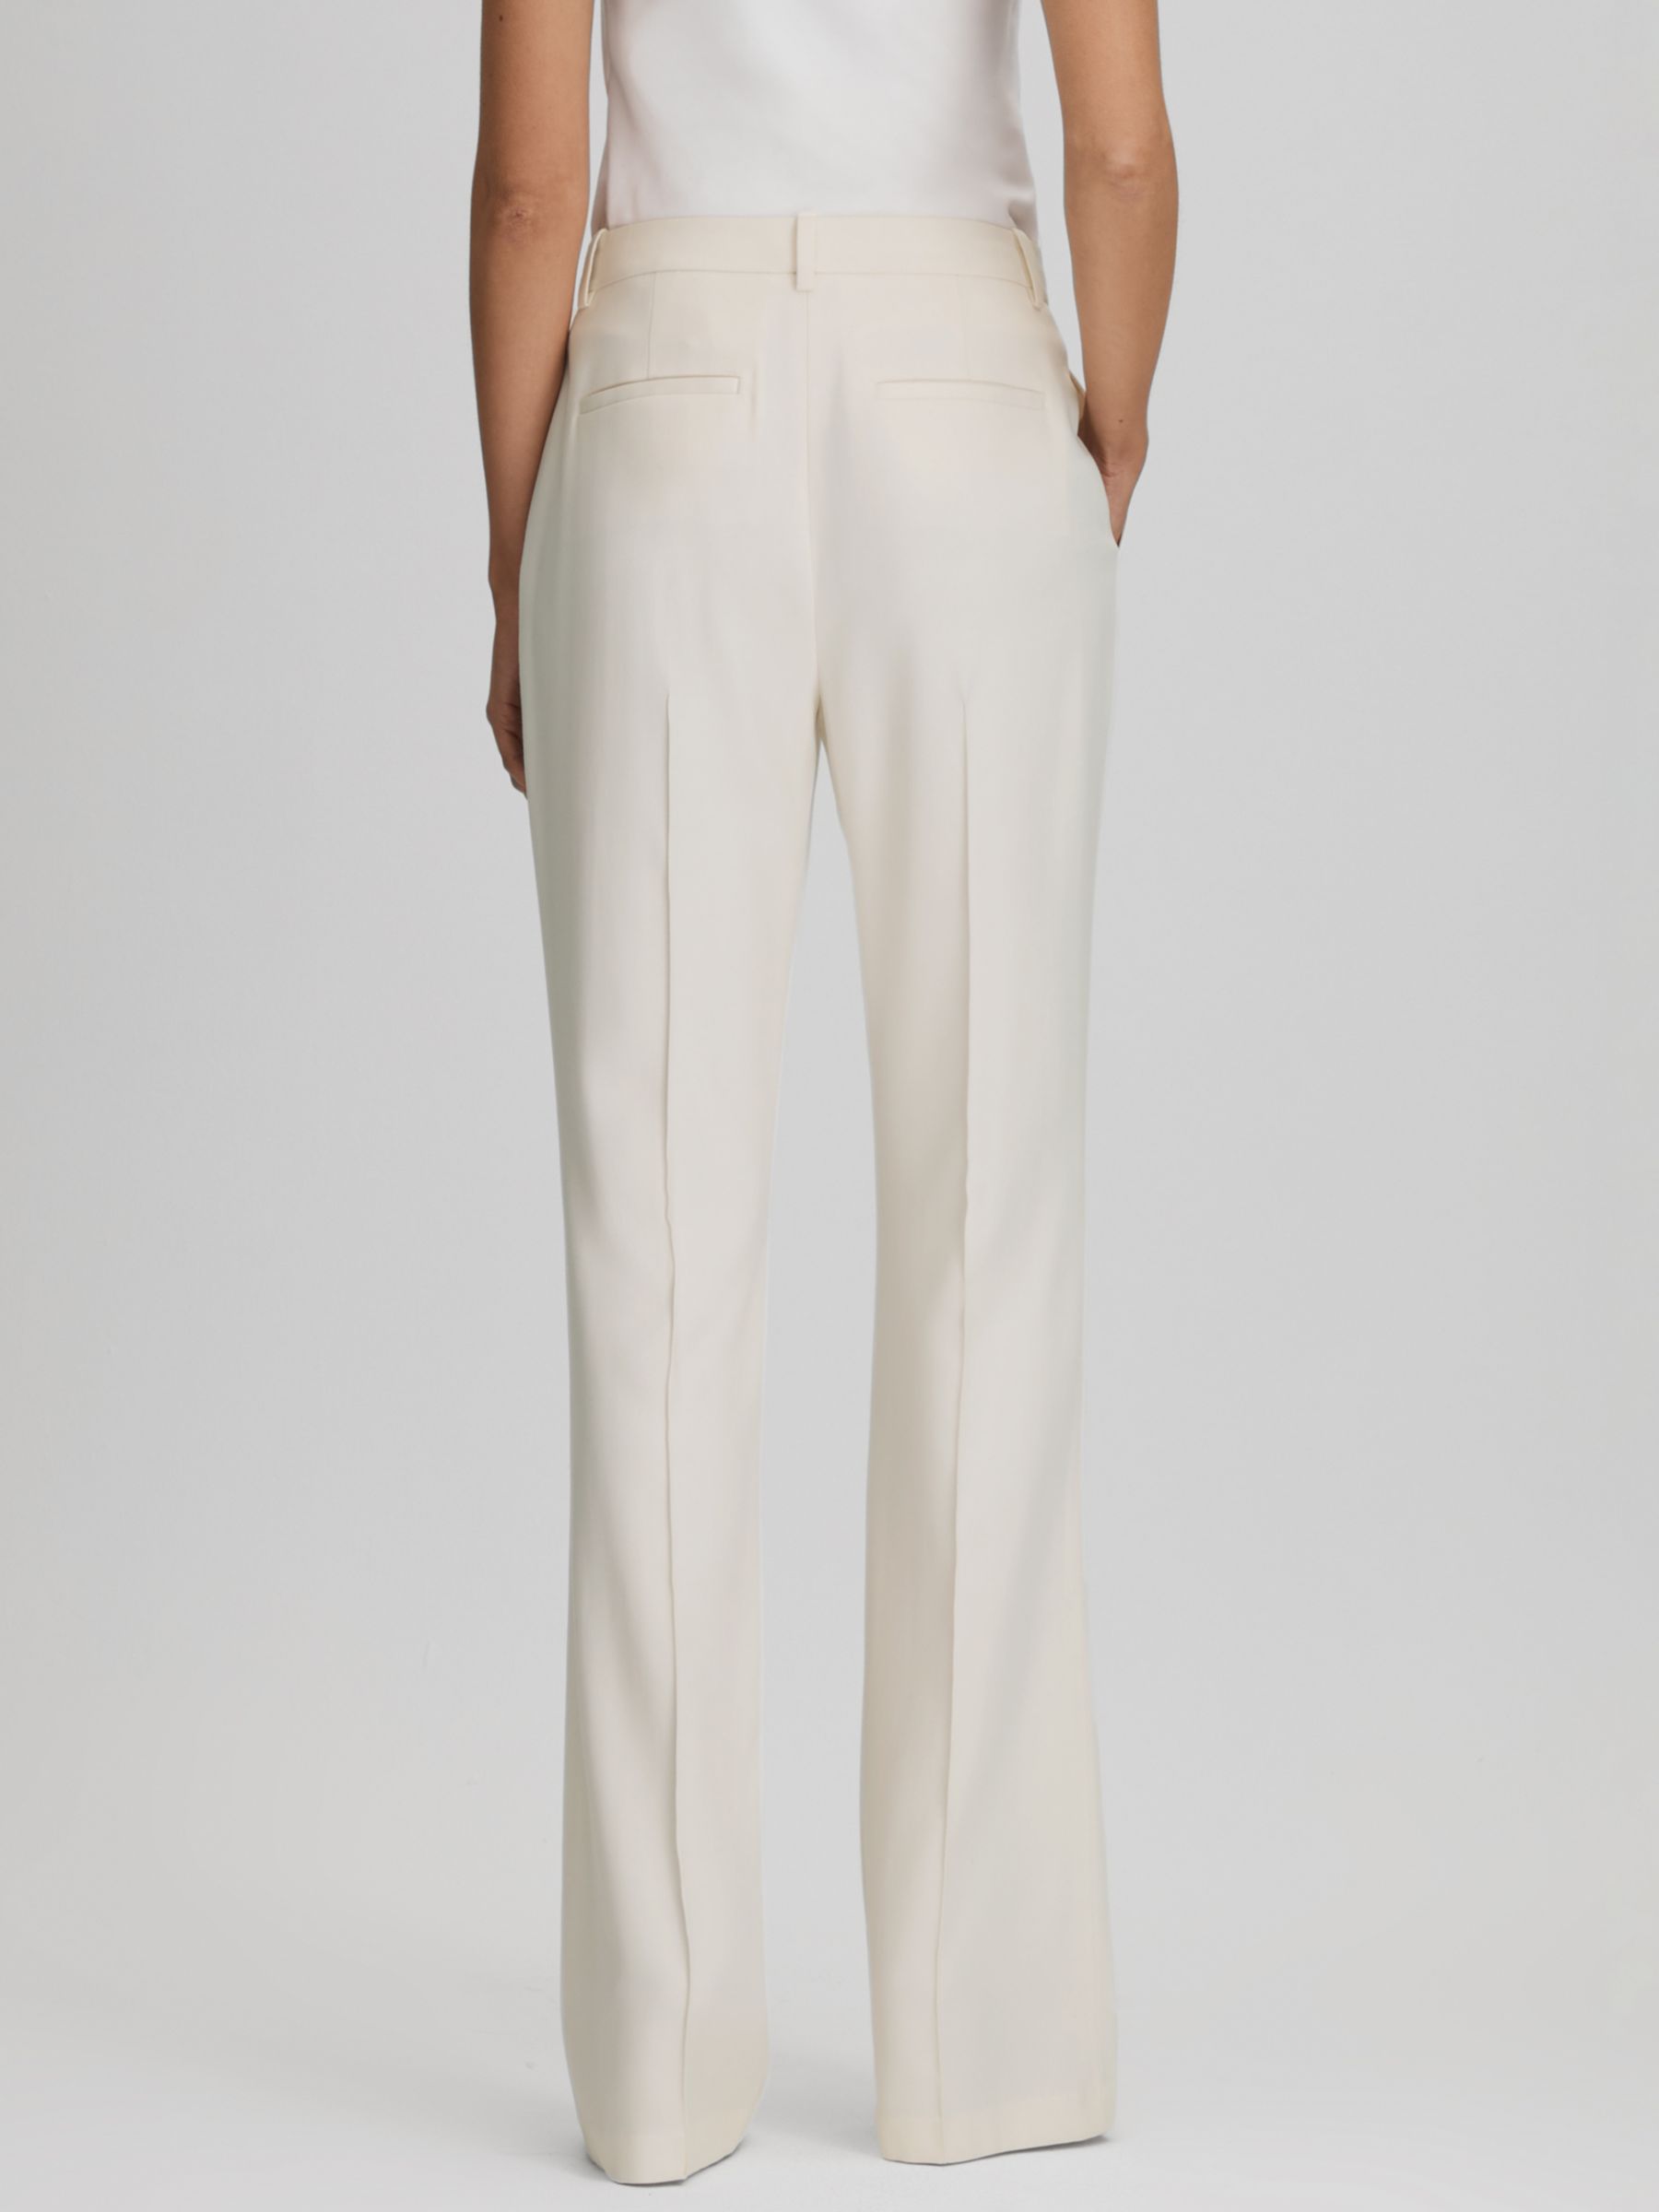 Buy Reiss Millie Flared Tailored Suit Trousers Online at johnlewis.com